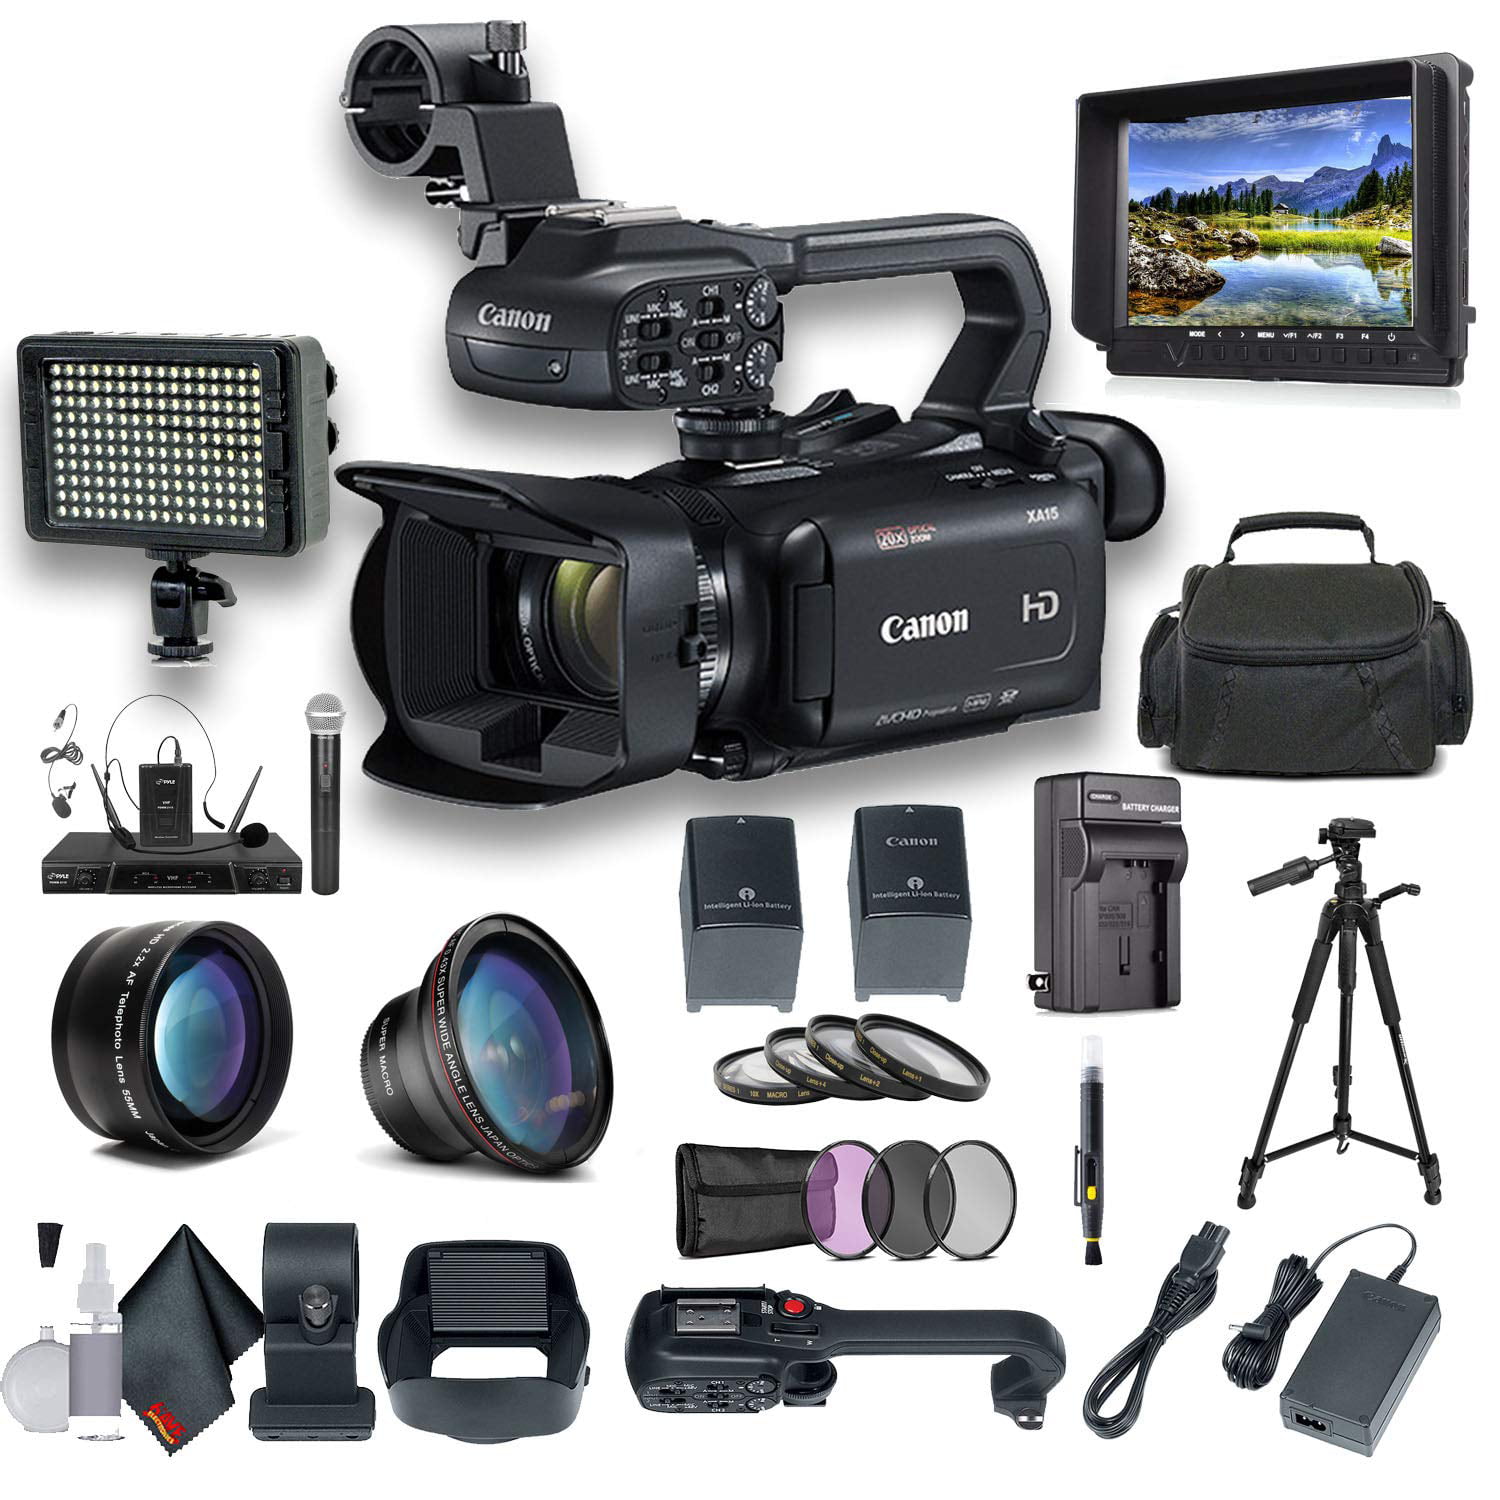 2 Extra Batteries and Charger Rode VM-GO Mic Professional Bundle Tripod LED Light Screen Canon XA15 Compact Full HD Camcorder 2217C002 with 2-64GB Cards and Sony MDR-7506 Headphones Case 